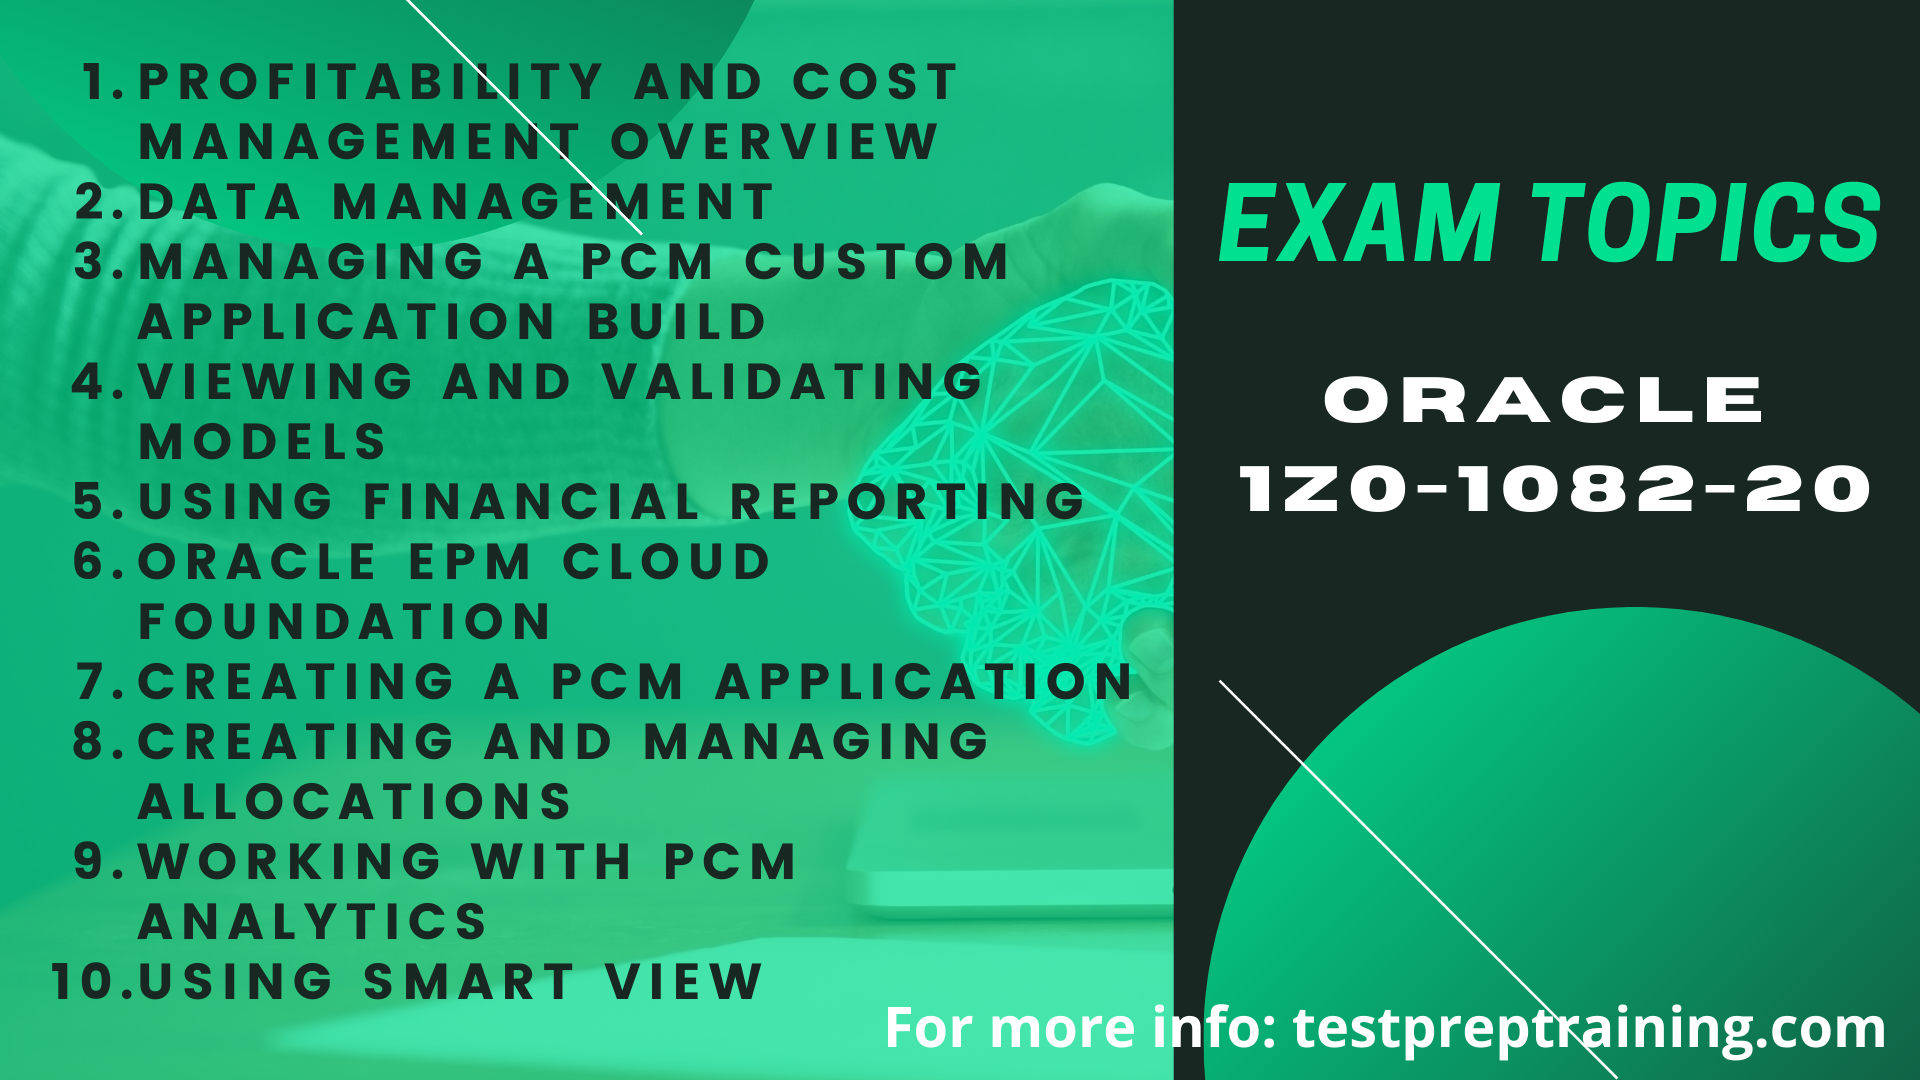 Oracle 1Z0-1082-20 course outline